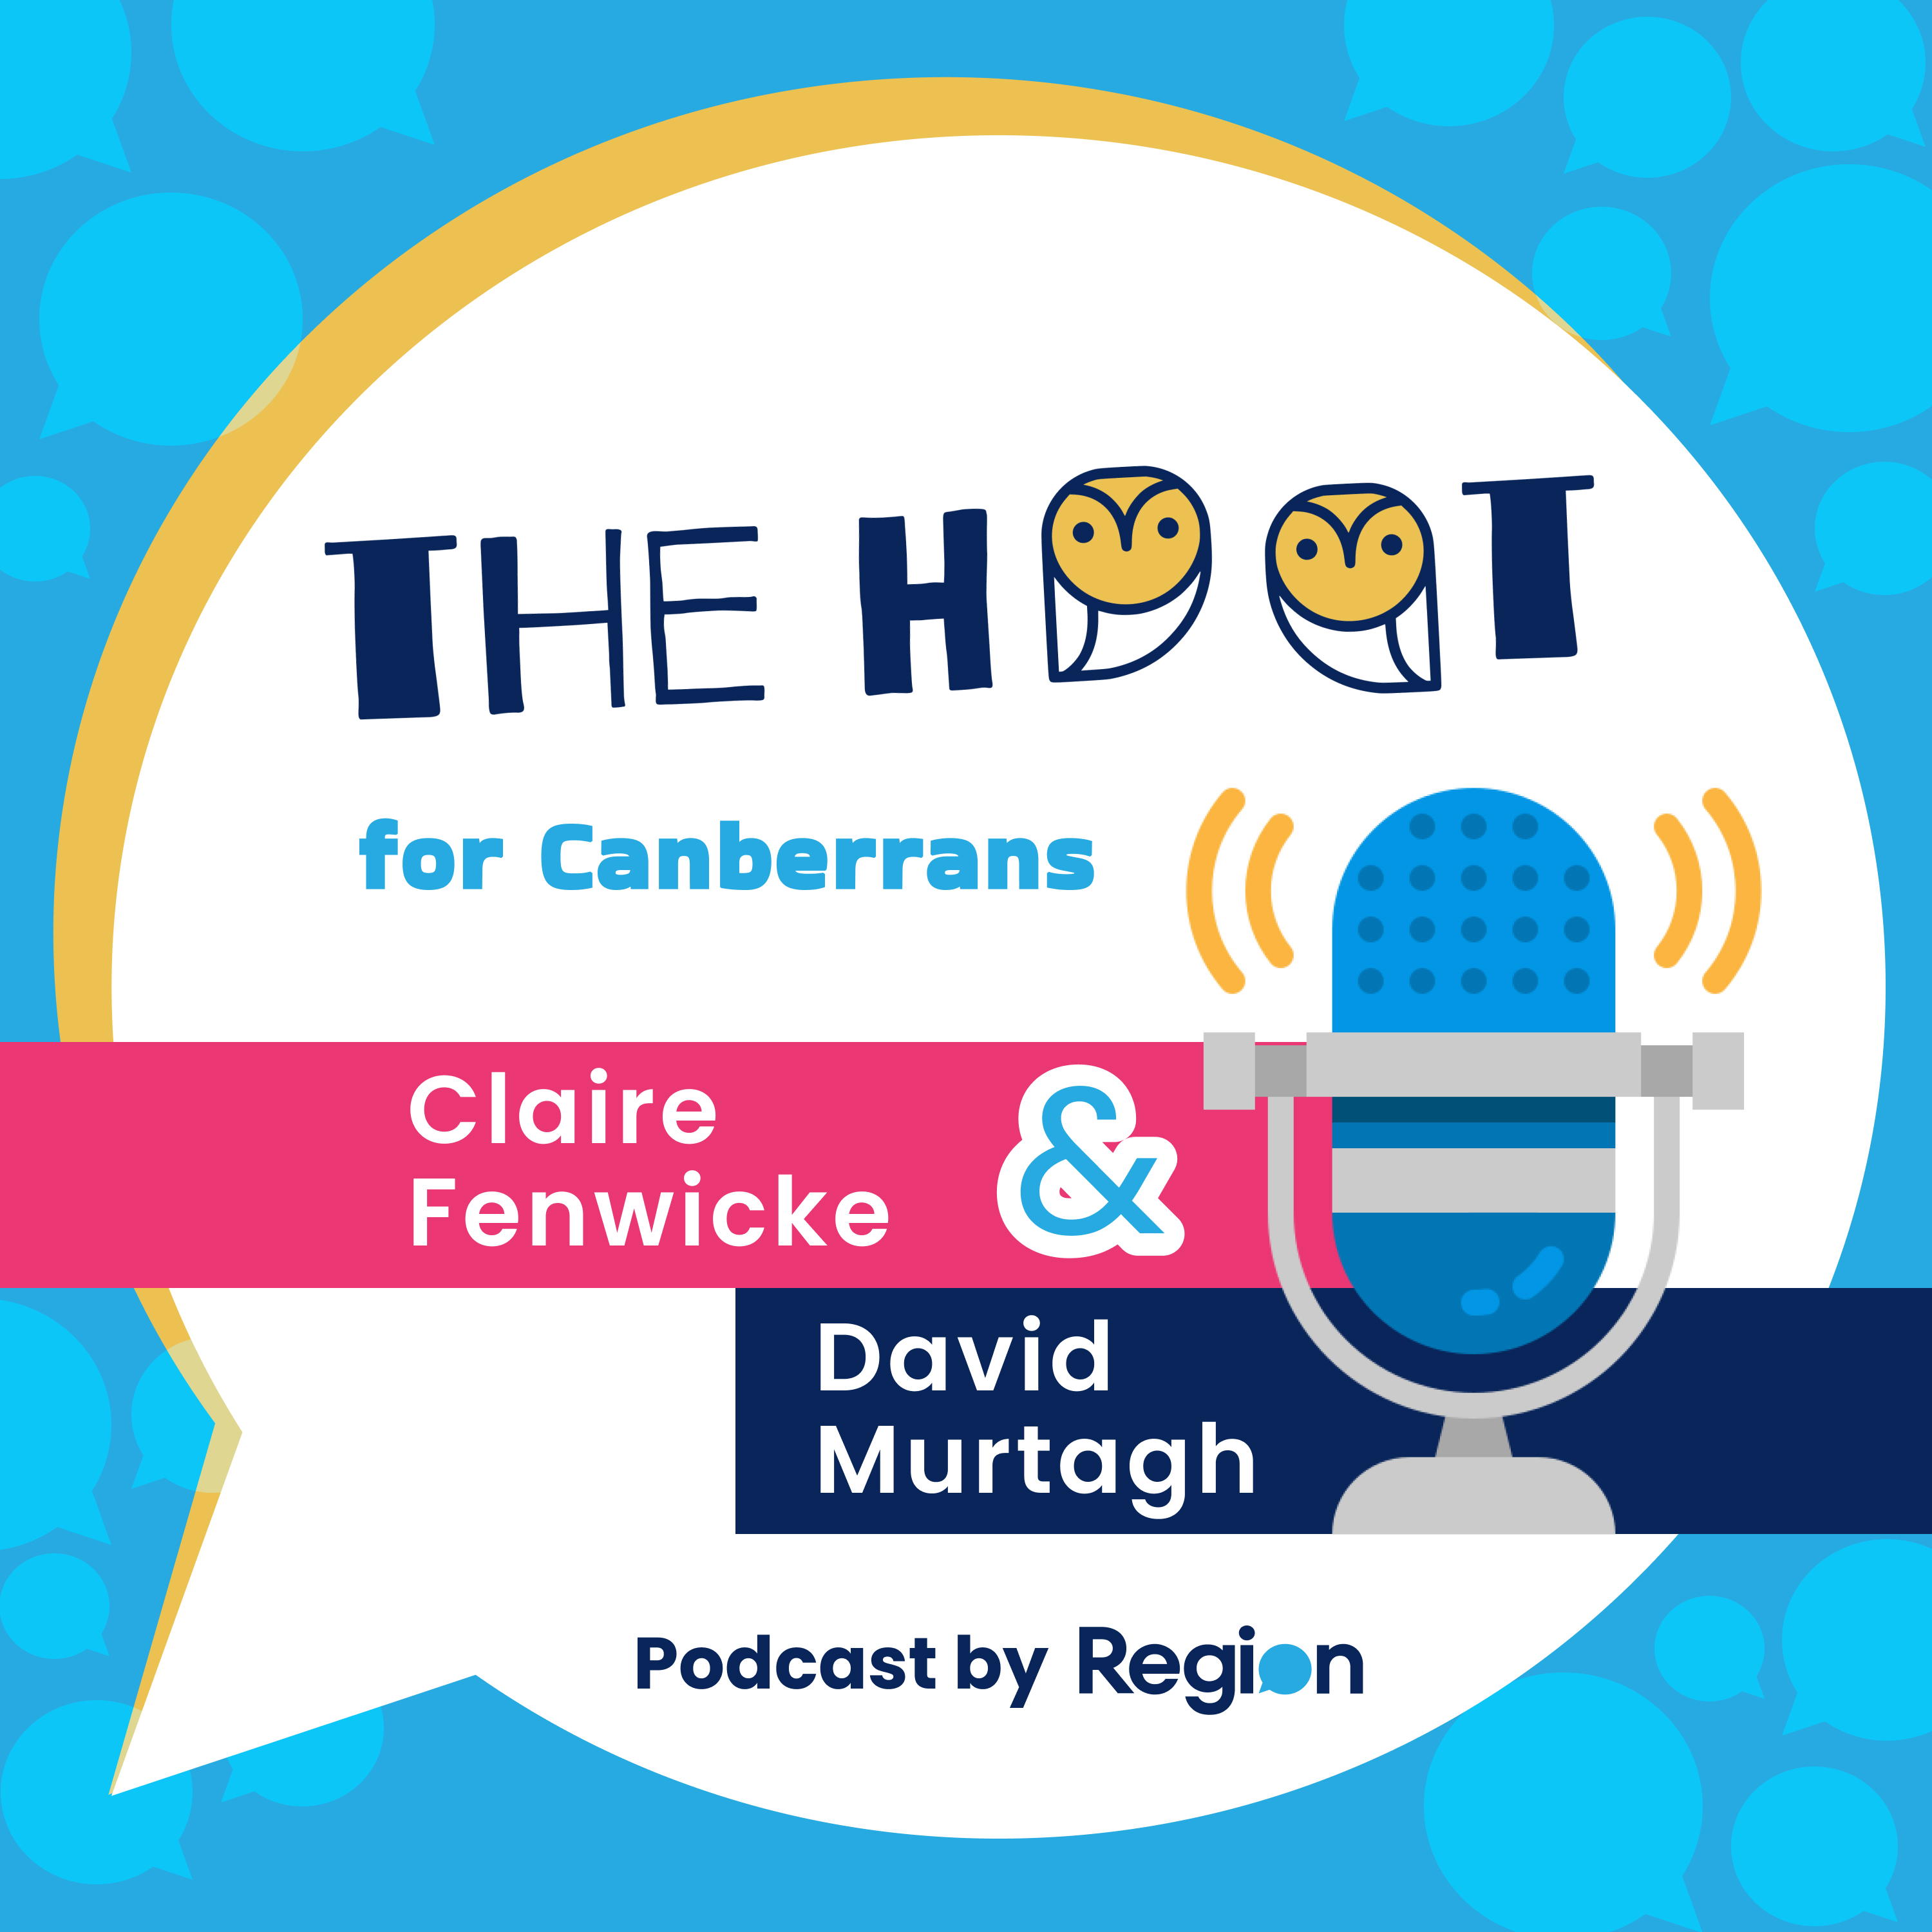 S2 Ep 21: Katy Gallagher, the War Memorial and Canberra's hottest foods